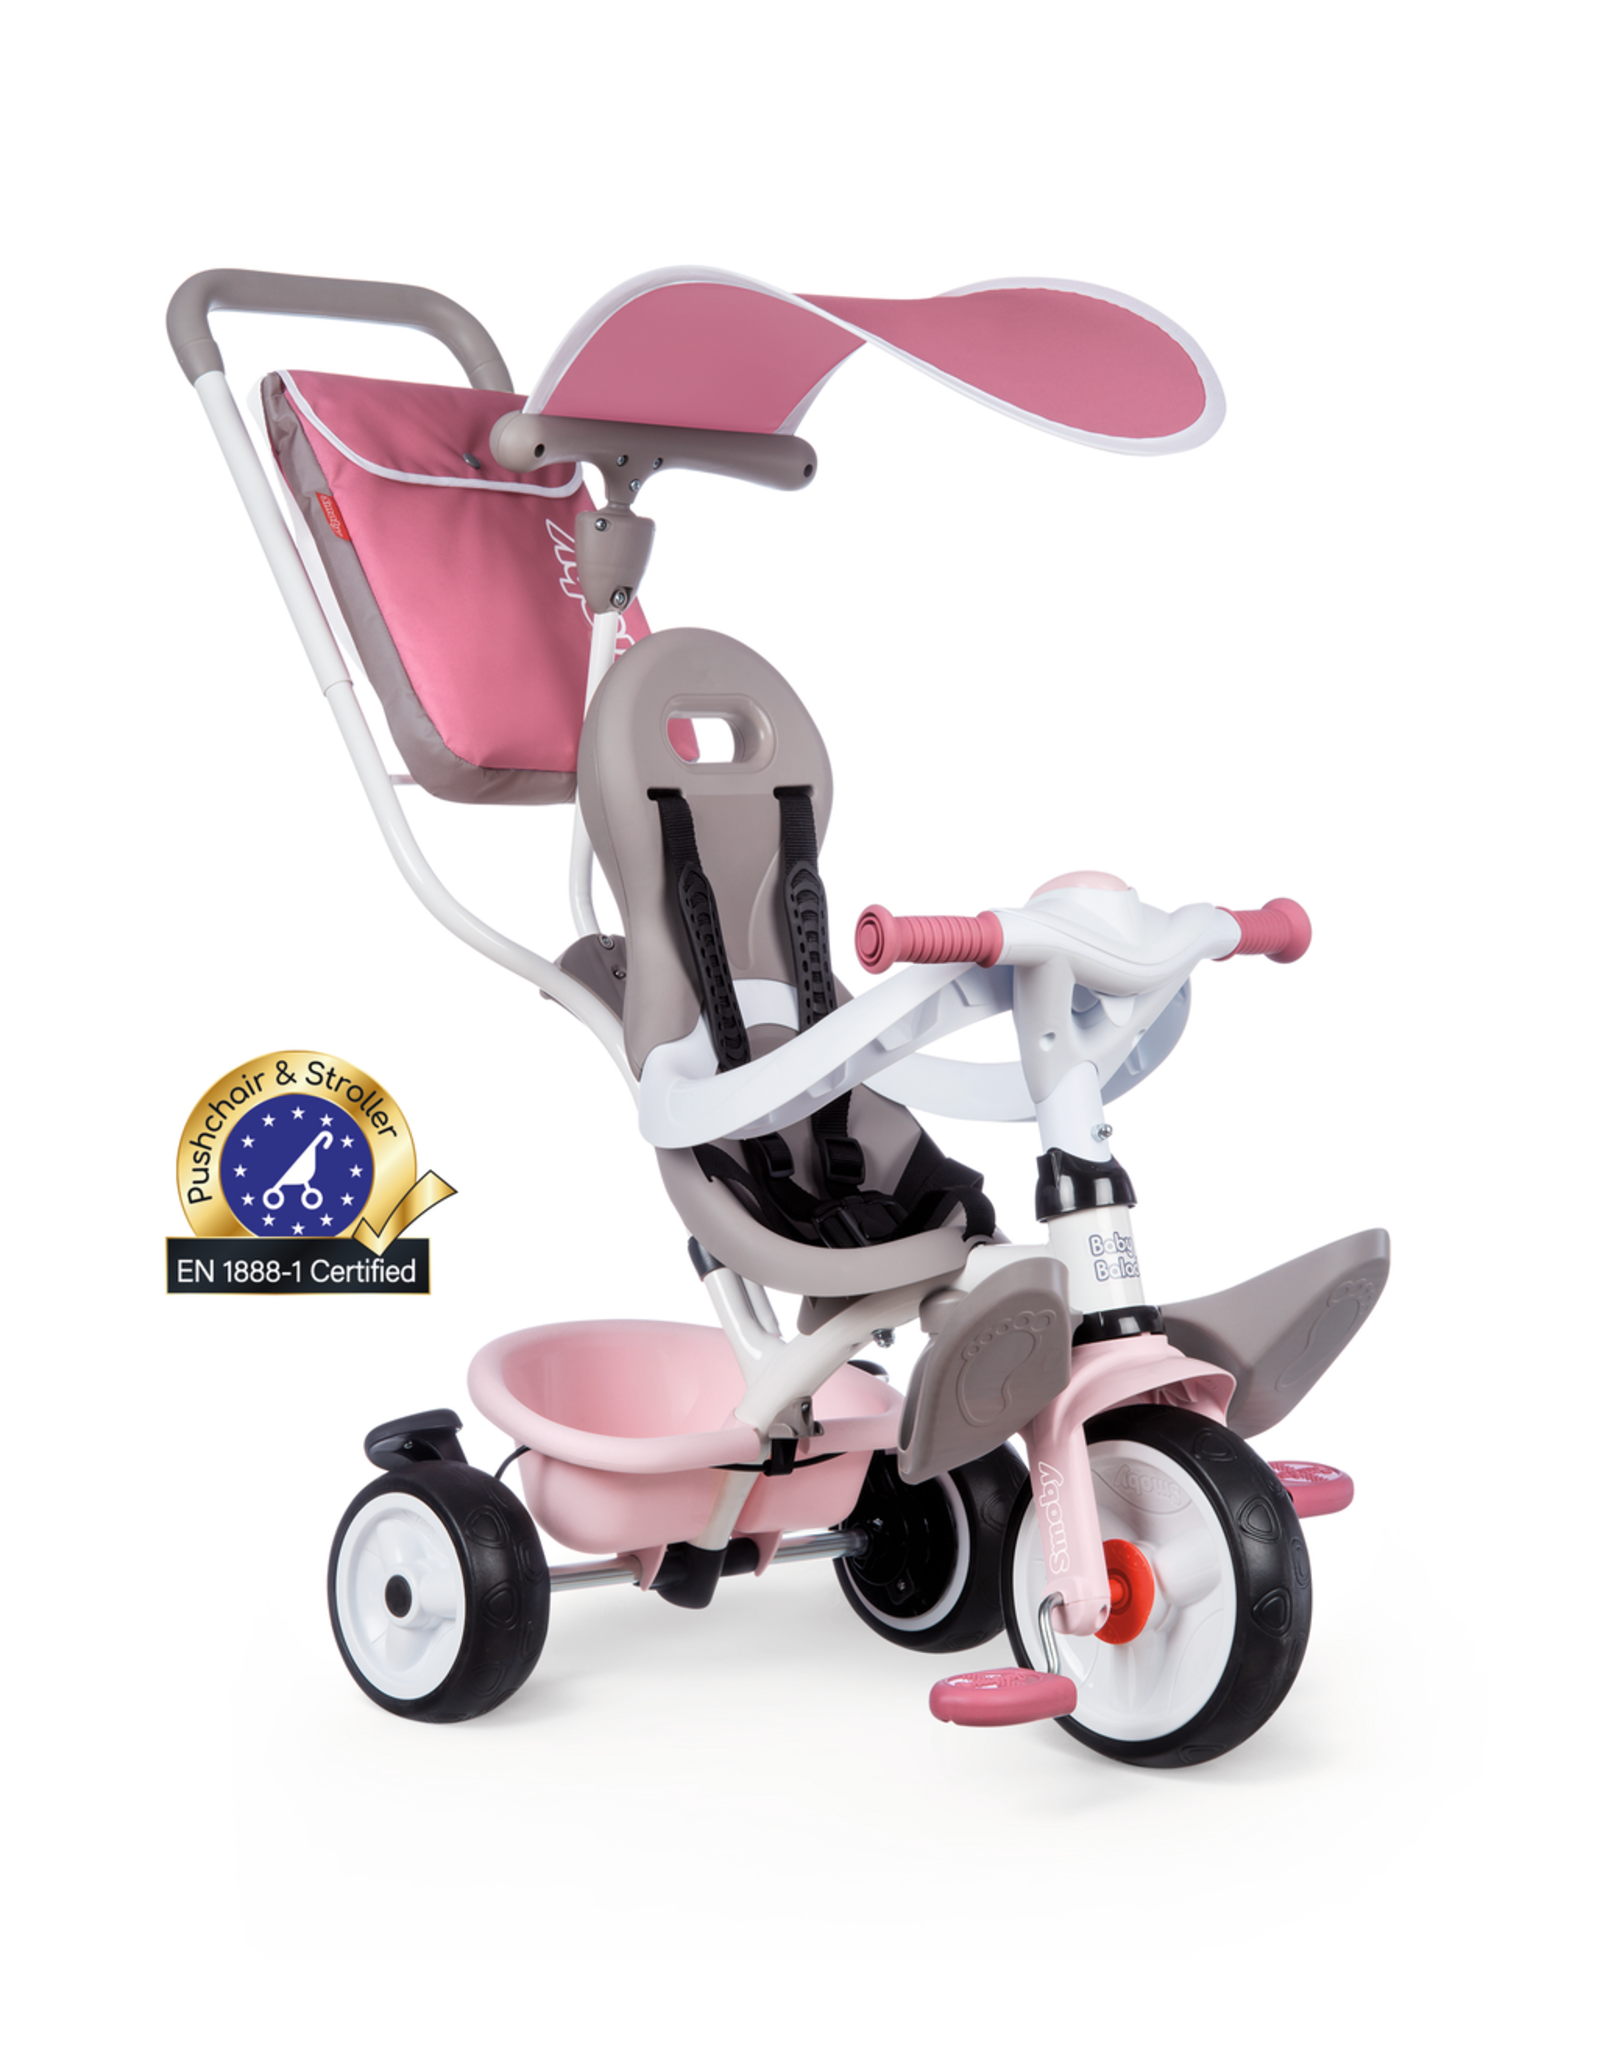 Smoby Baby Balade Plus 3 In 1 Infant Tricycle / Trike Pink